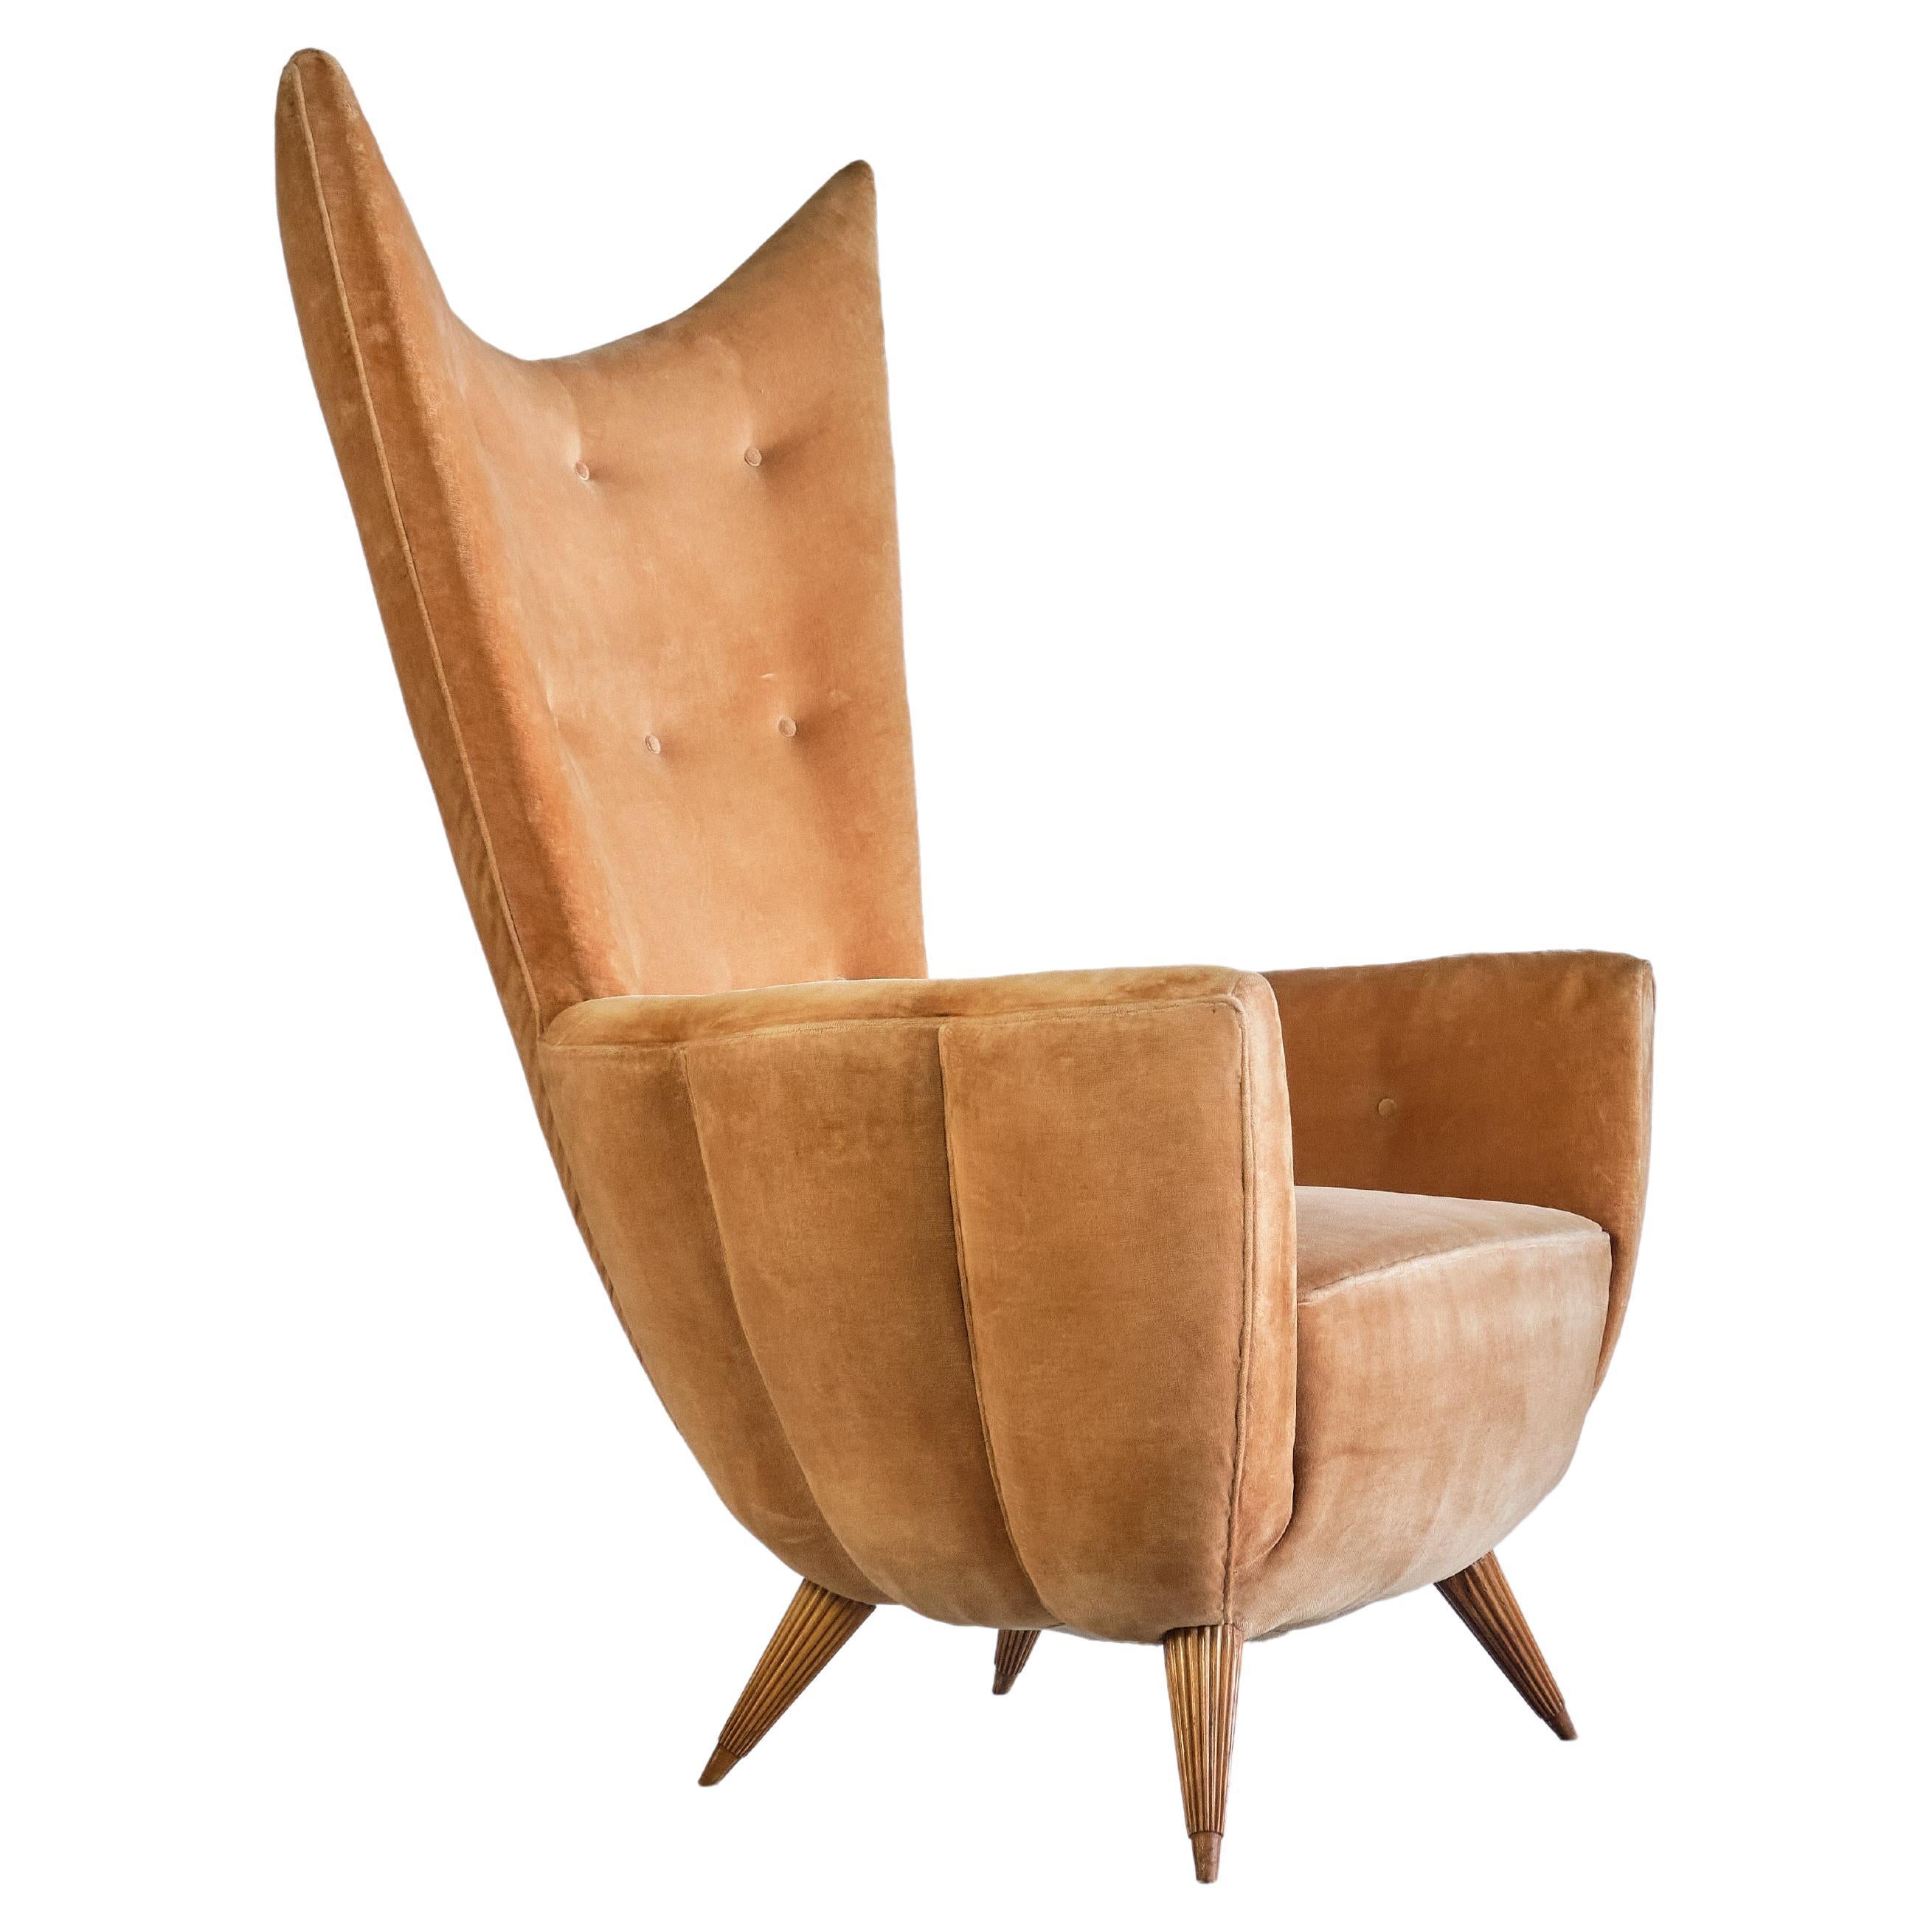 Exceptional Guglielmo Ulrich Armchair in Velvet and Fluted Walnut, Italy, 1940s